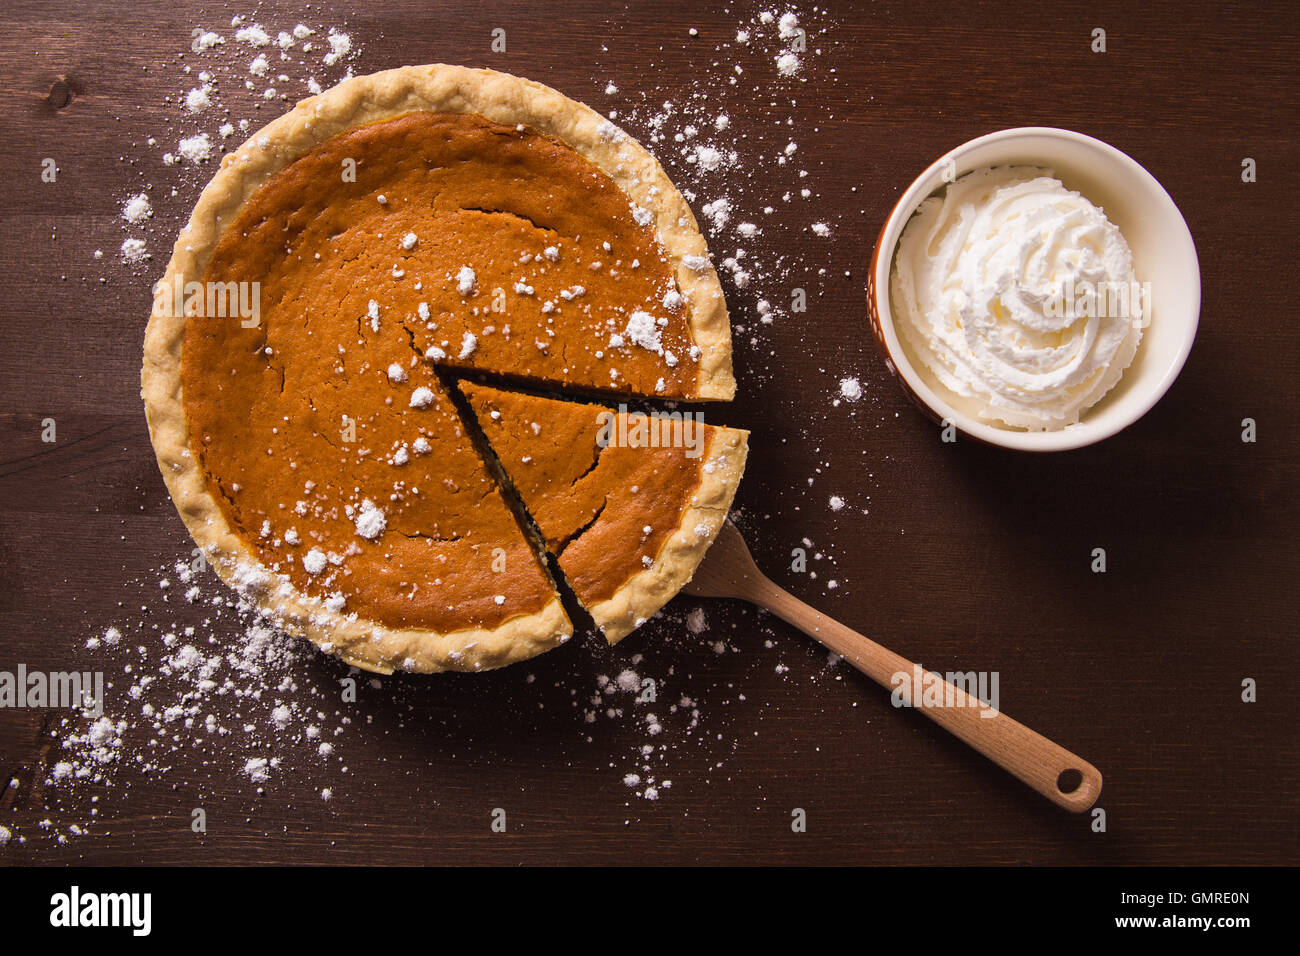 An overhead view of a gourmet pumpkin pie with a side of whipped cream on a rustic wood table surface Stock Photo